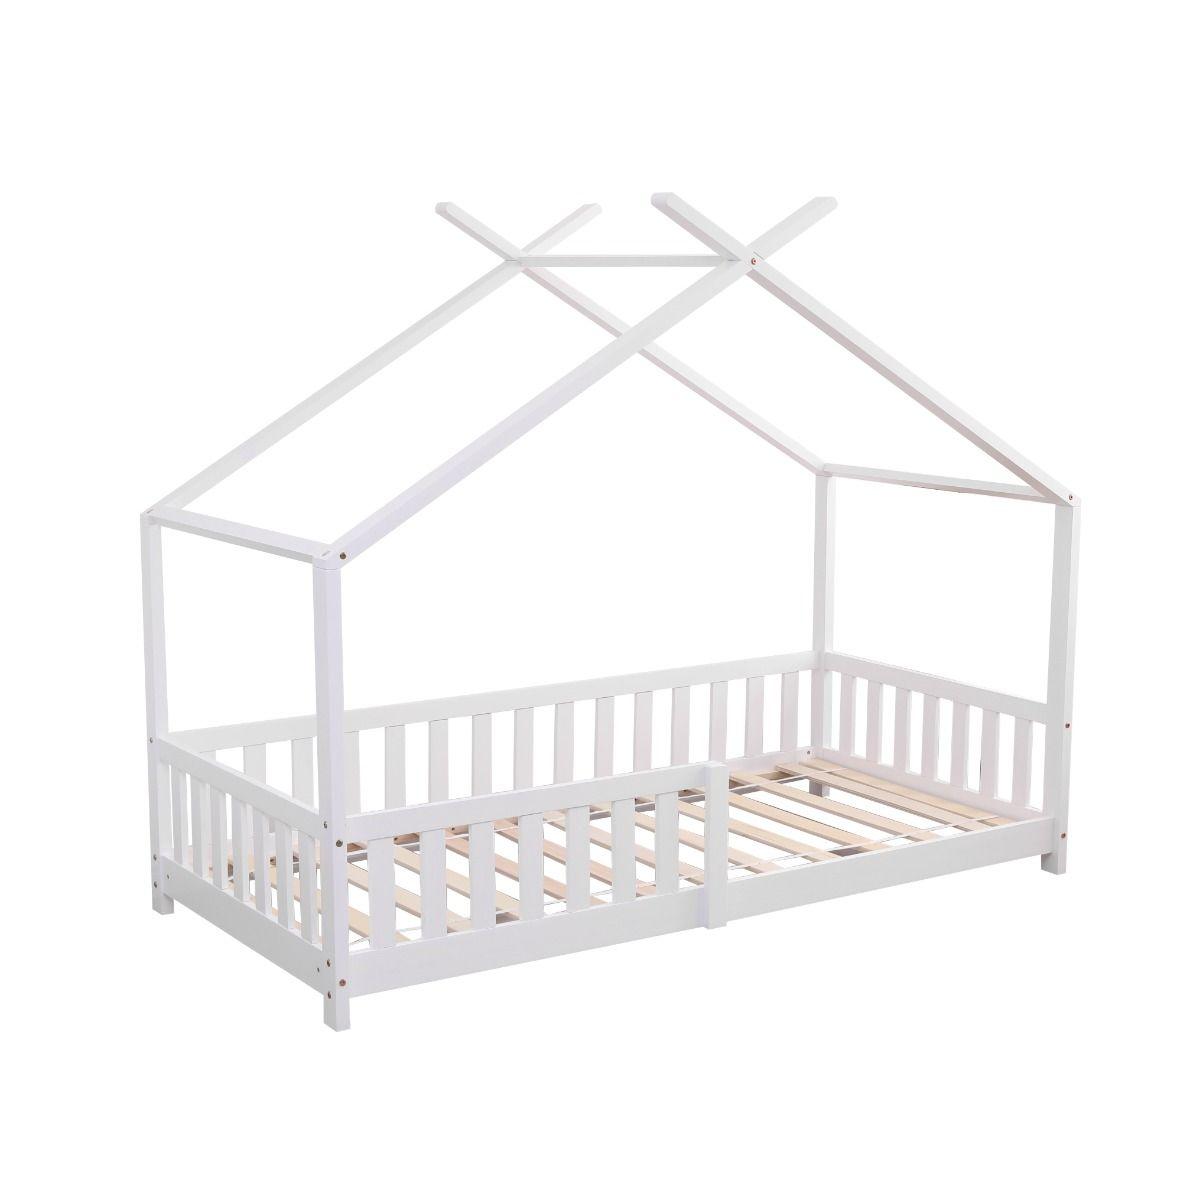 Scout Tree Wooden Bed Frame White 3